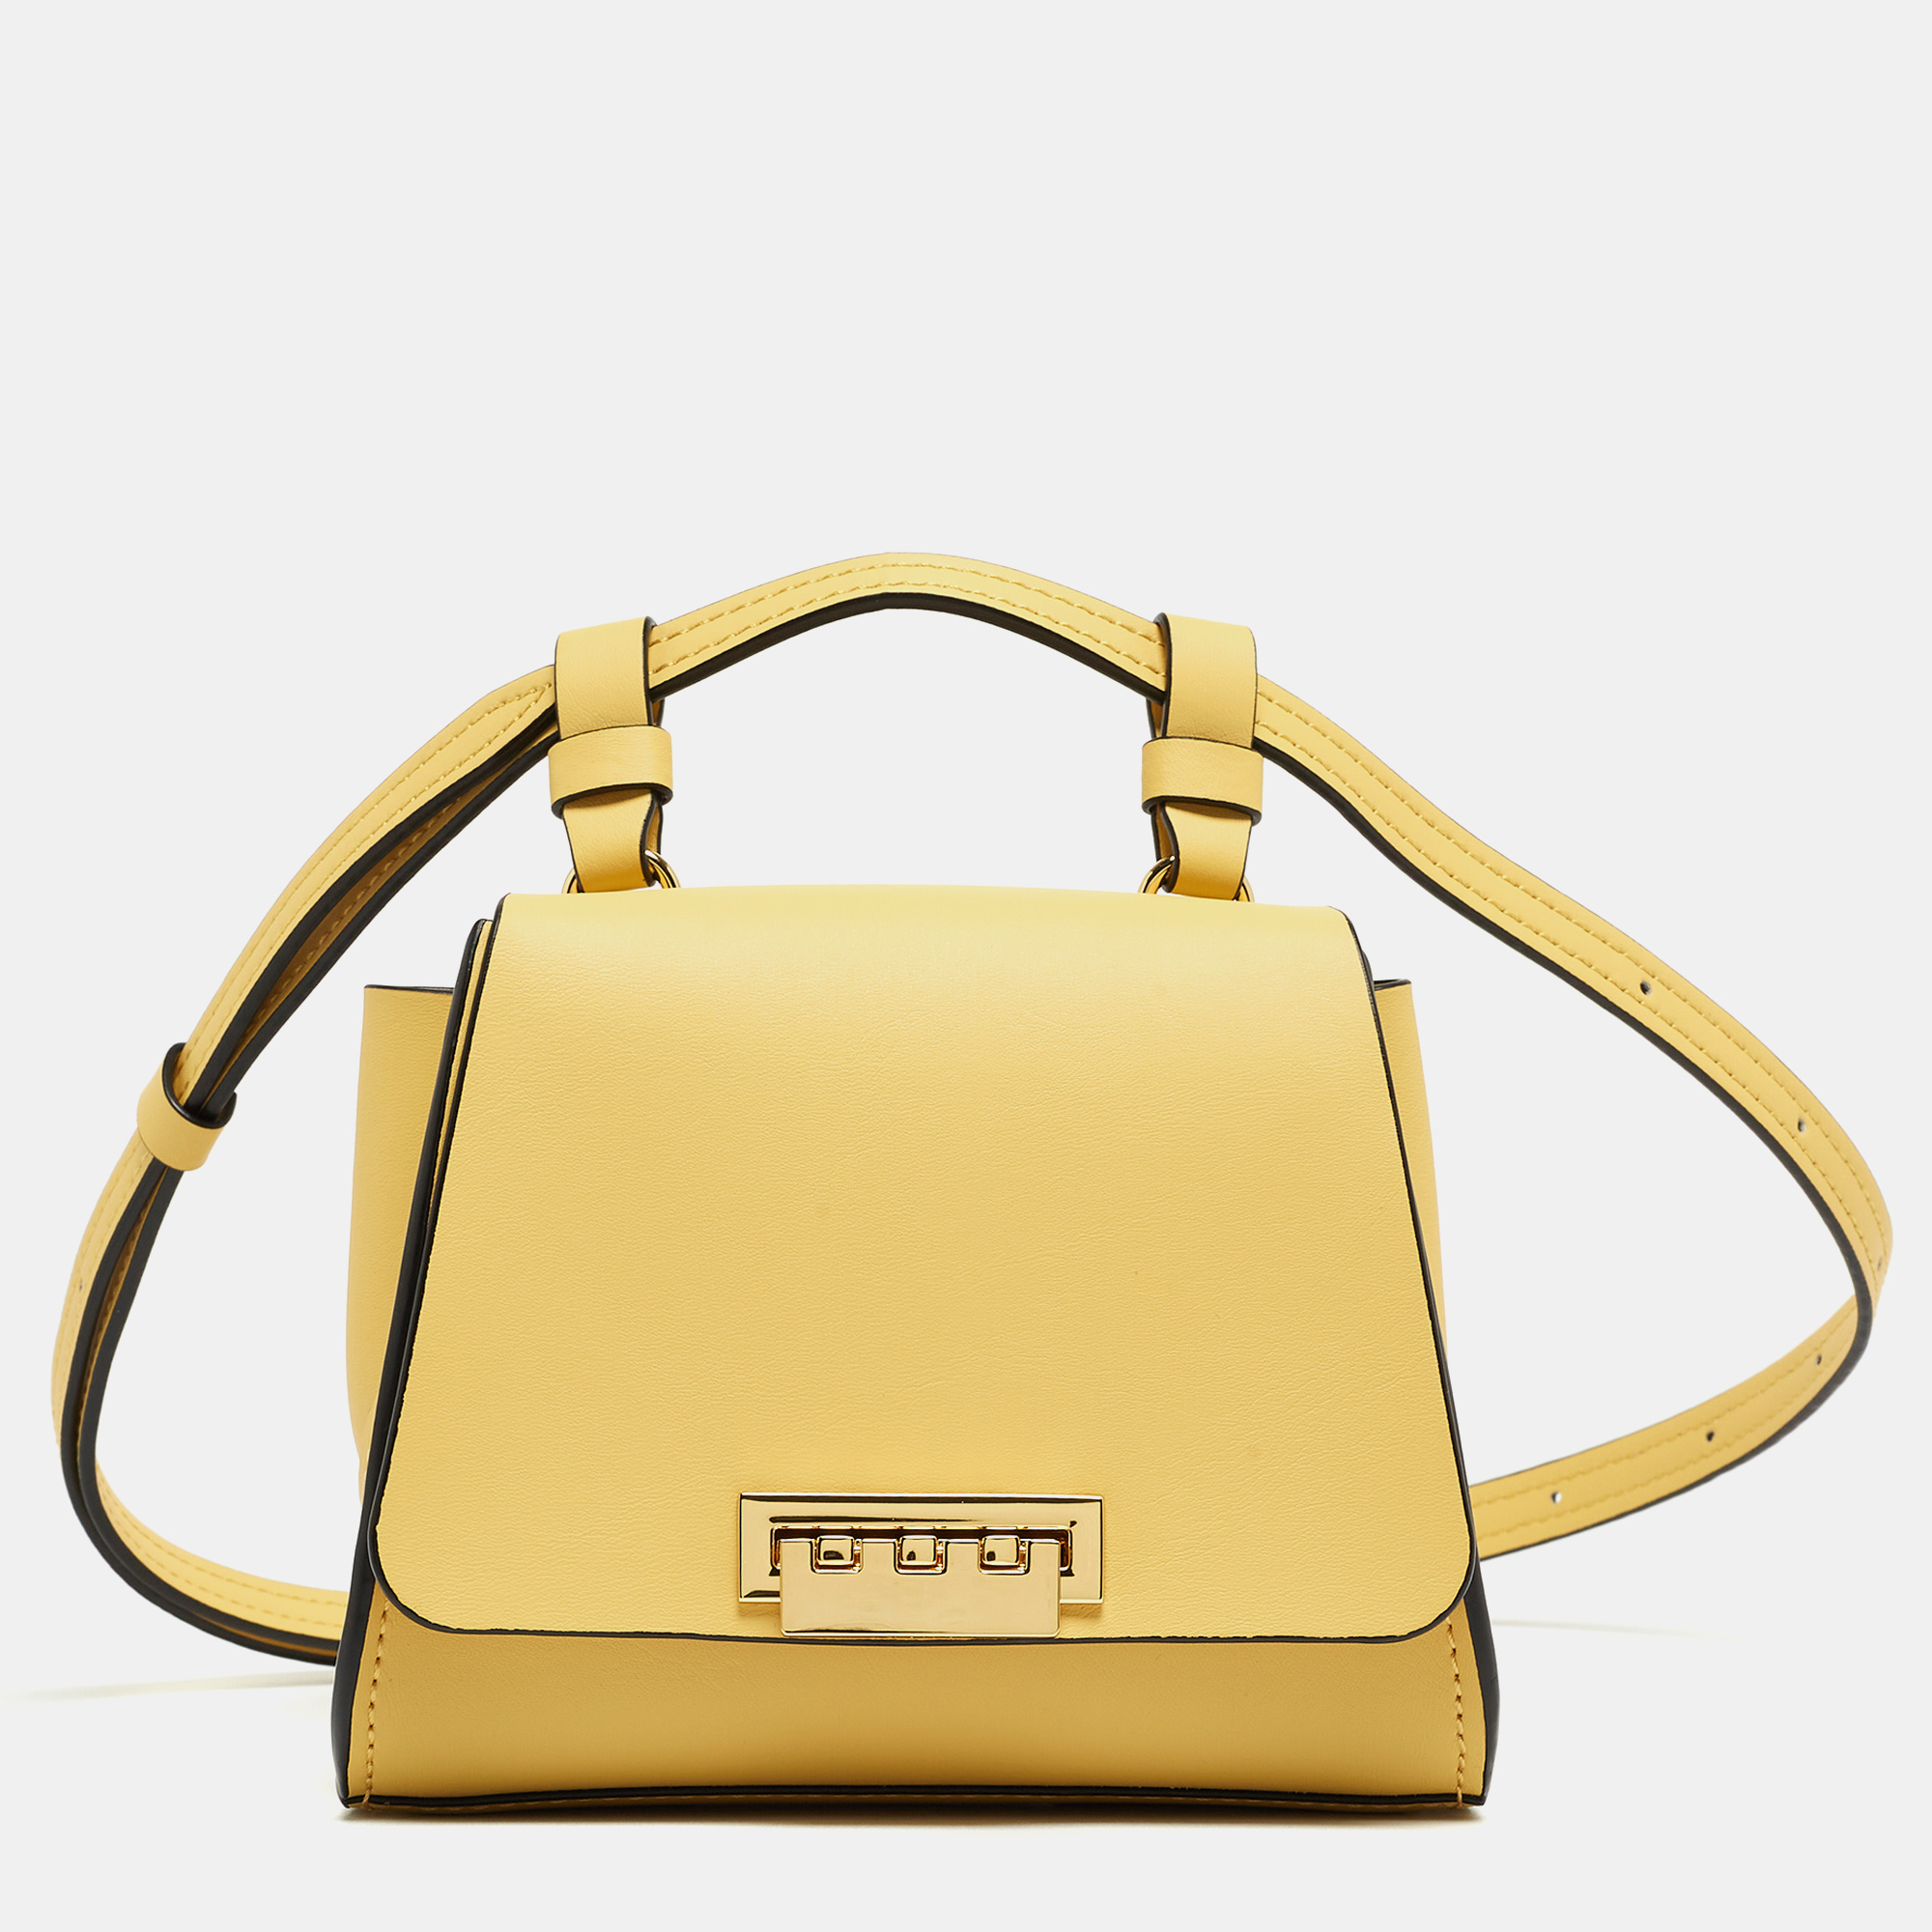 Designed by Zac Posen this light yellow leather bag is a fine balance of sophistication and utility. It has a flap style a top handle shoulder strap winged gussets and a leather interior. Fall in love instantly with this gorgeous mini Eartha by Zac Posen.